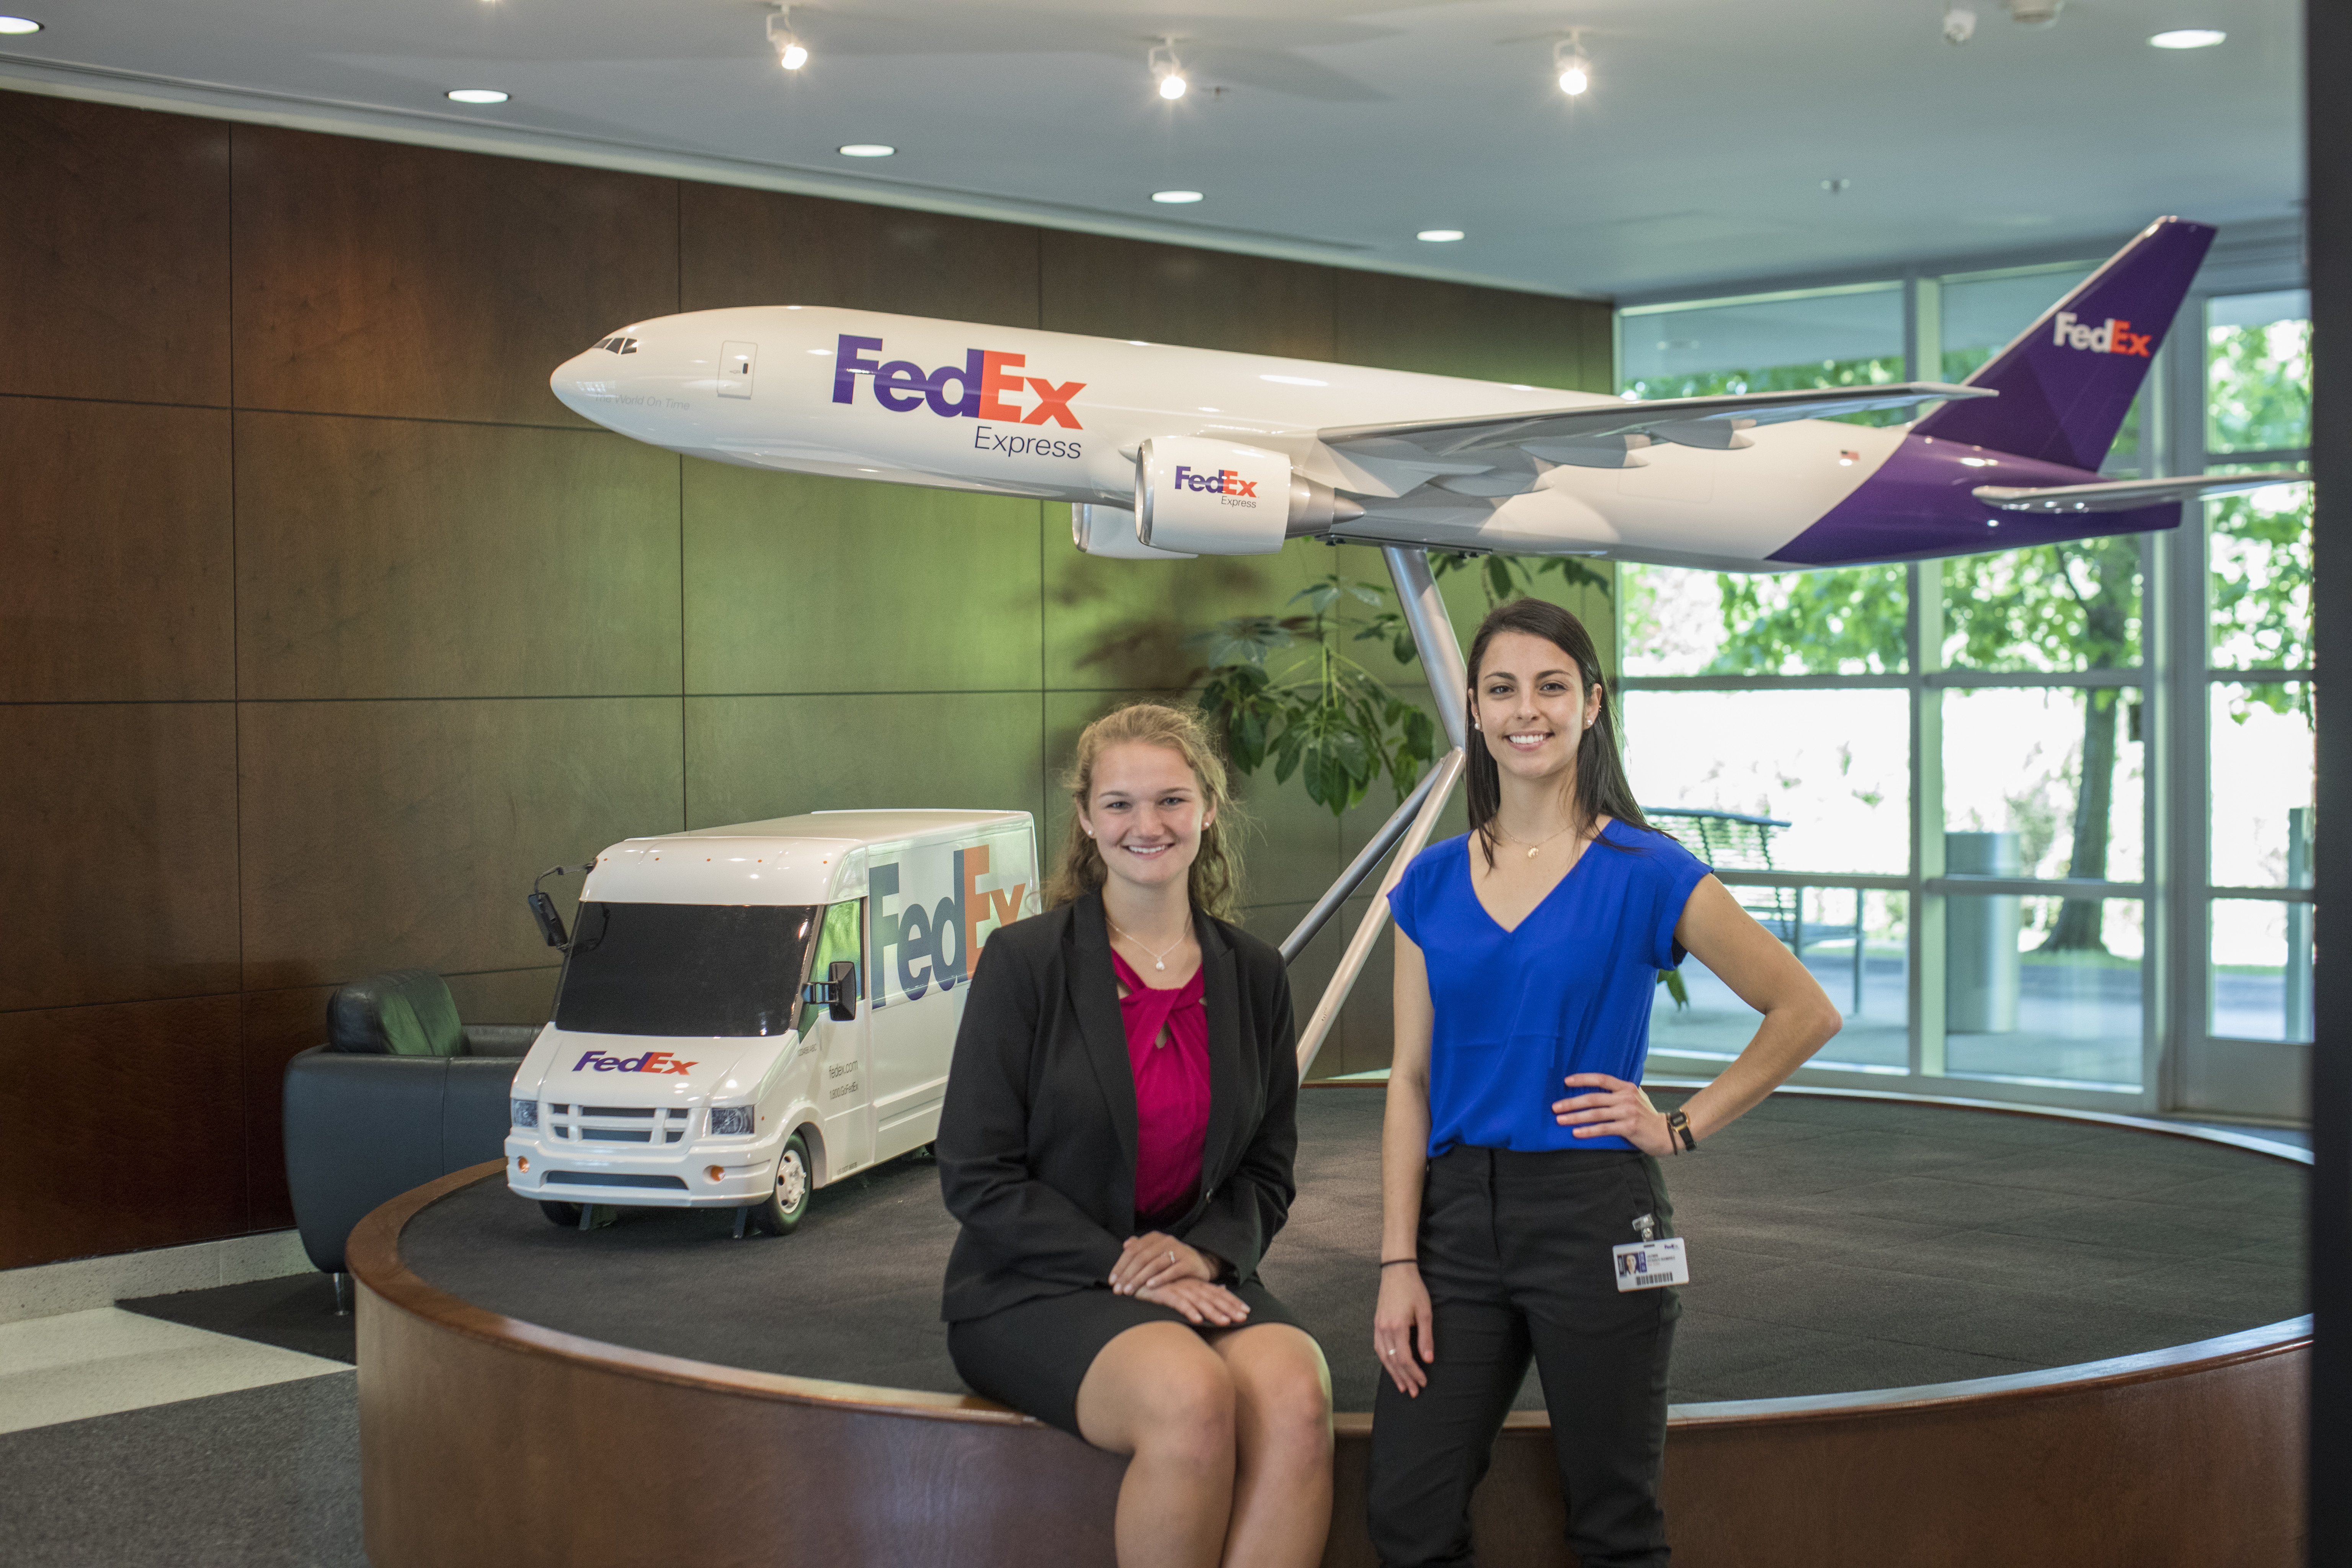 two young women stand in front of a model of a FedEx plane